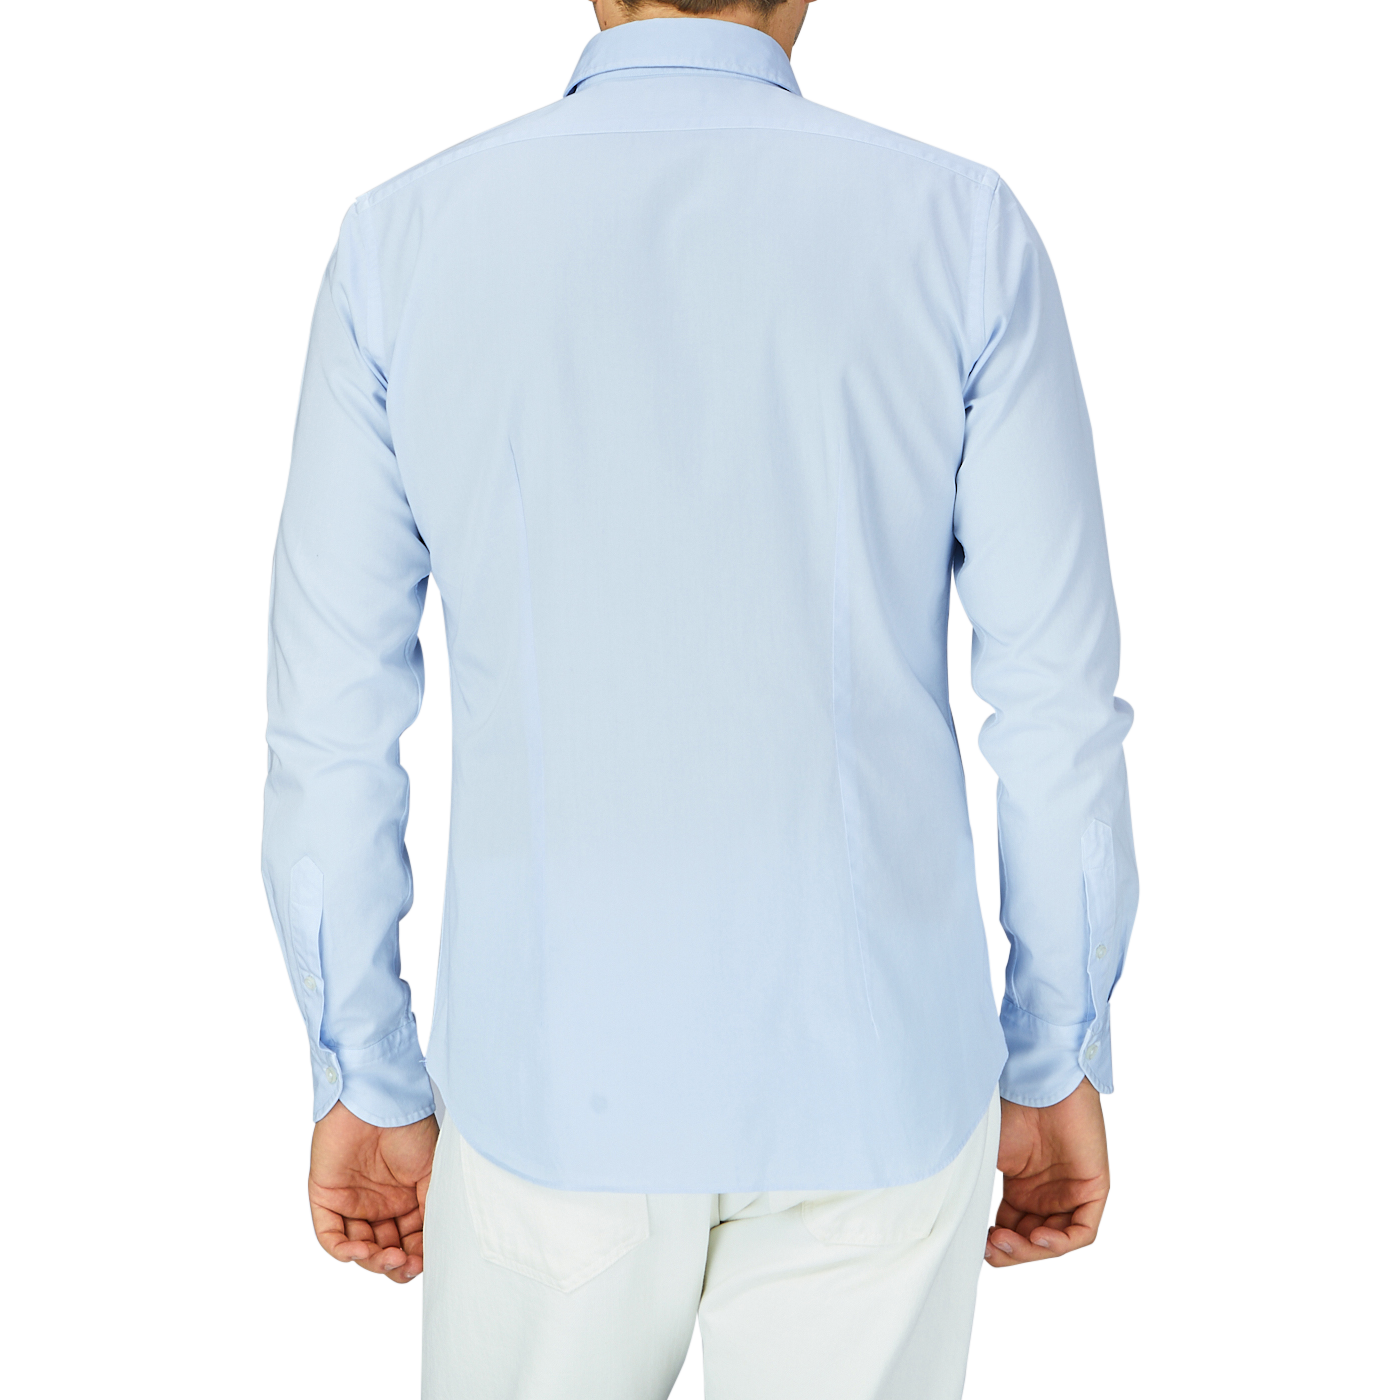 A man standing with his back to the camera, wearing a Xacus Light Blue Cotton Twill Tailor Fit Shirt and white pants.